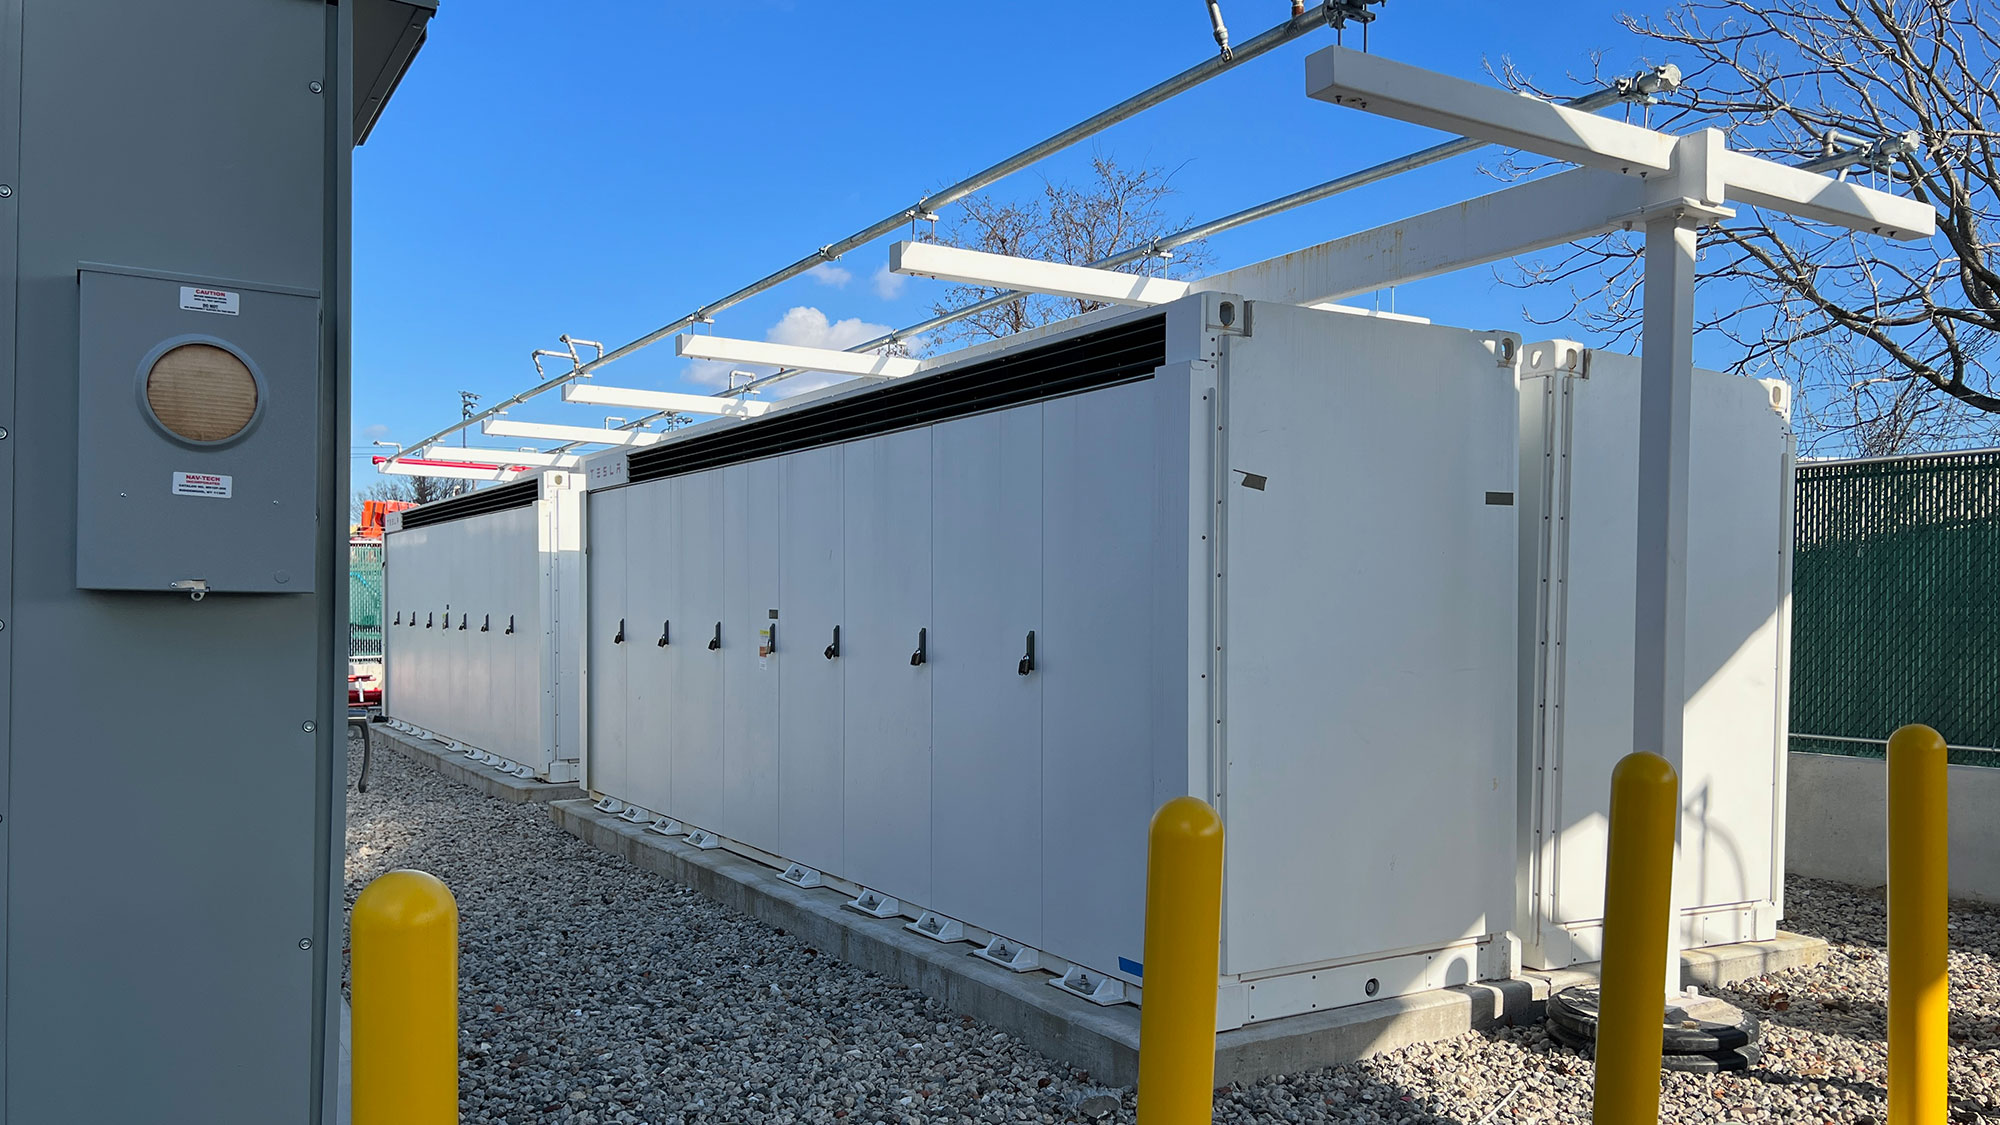 The four white units are the batteries, which can provide about three megawatts of power over four hours.